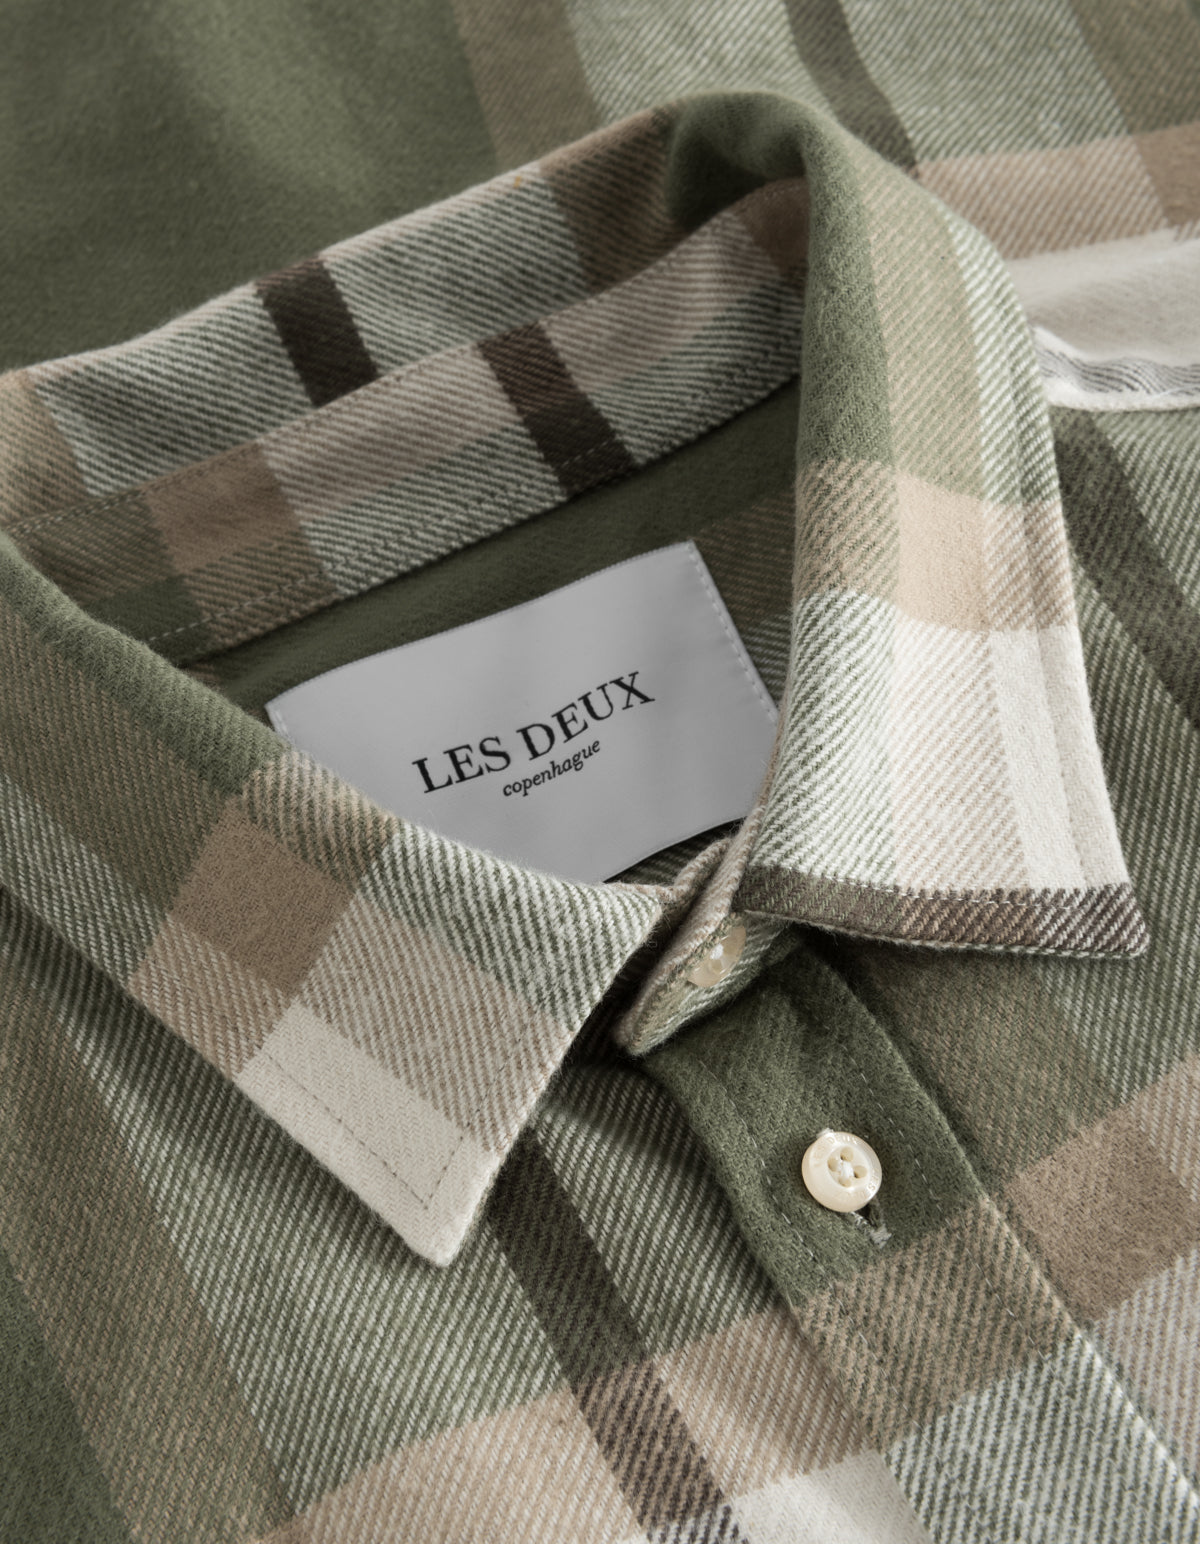 Jeremy Check Flannel Shirt - Olive Night/Lead Gray